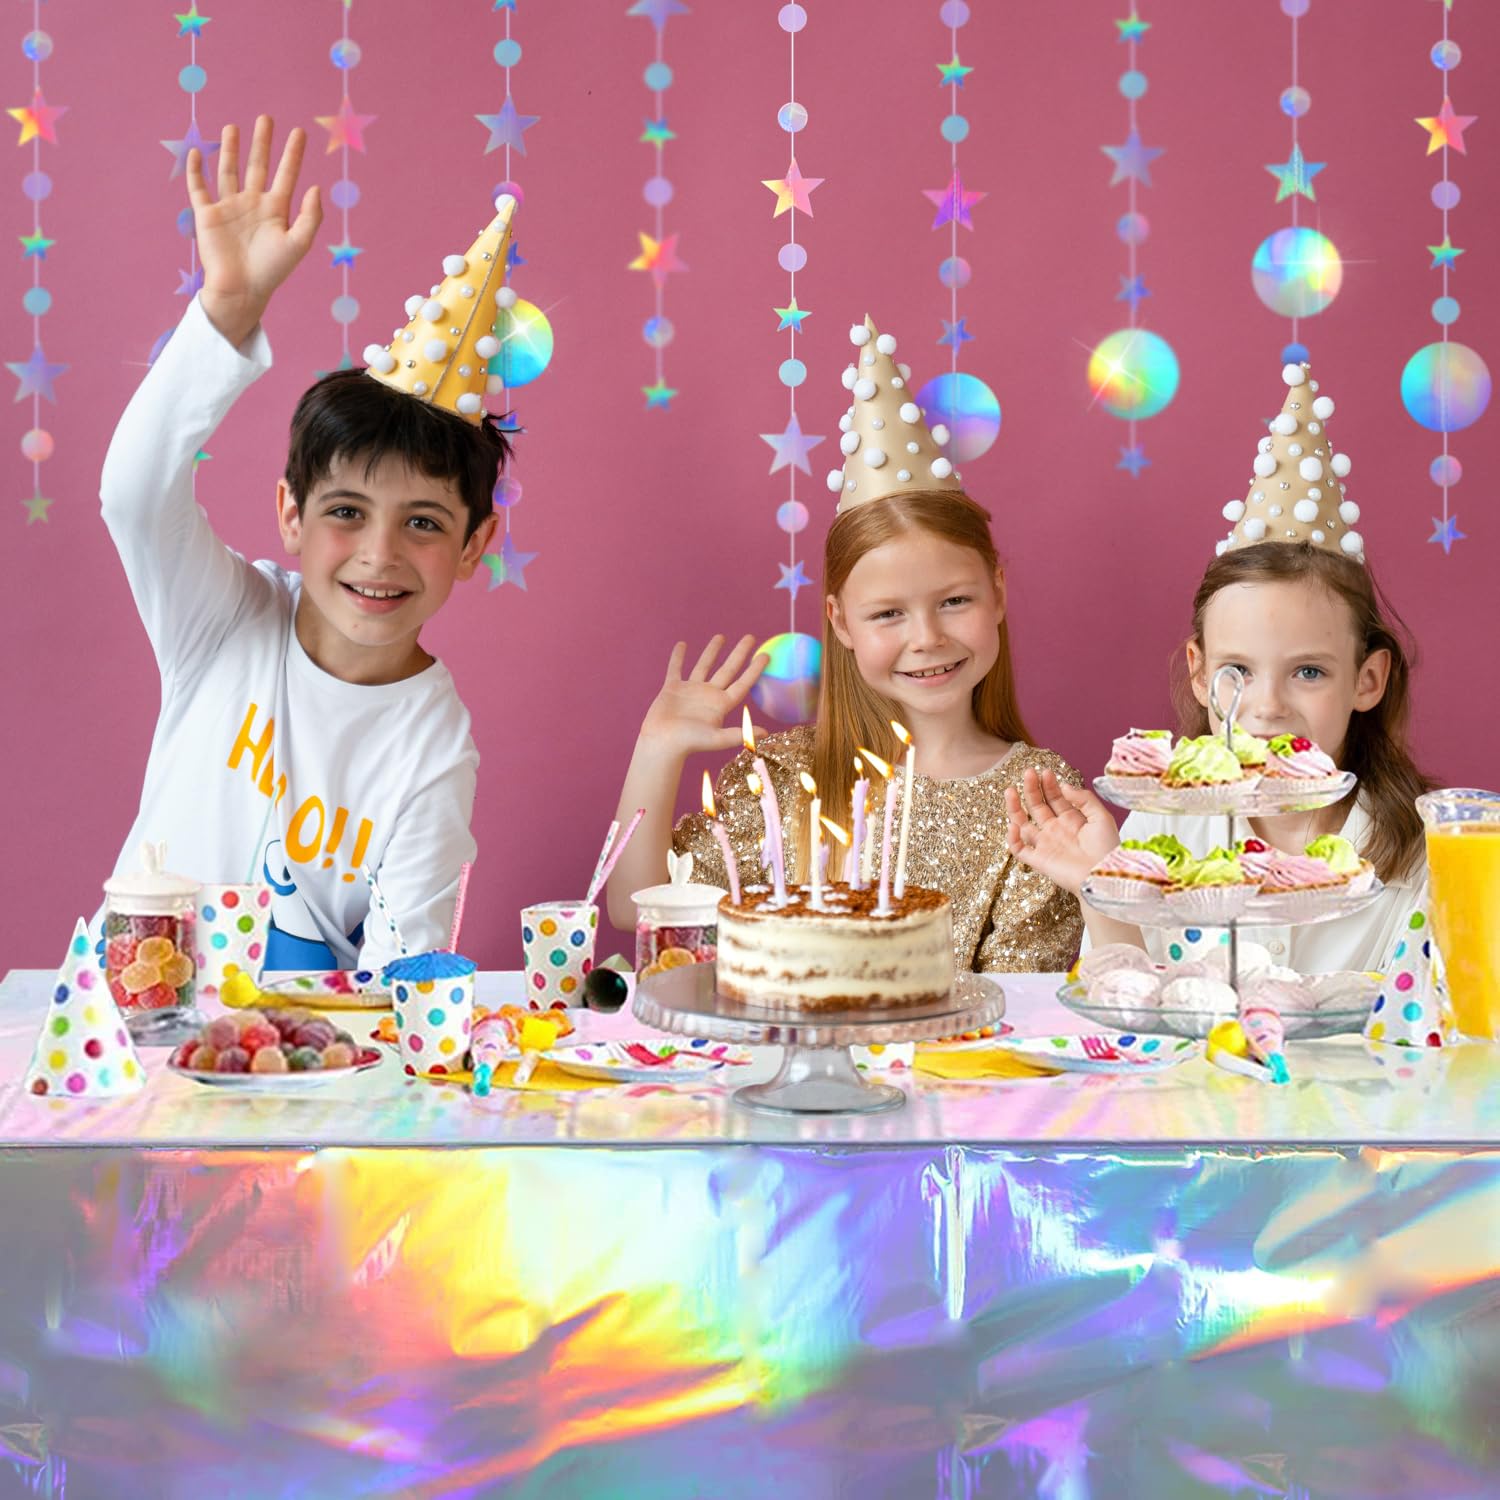 UNICORN ELEMENT Iridescent Birthday Decorations with Happy Birthday Banners, Iridescent Aluminum Foil Balloons, Hexagonal Star Round Ornaments, Sparkly Circle Garlands Hanging and Party Tablecloth for Birthday Party Supplies